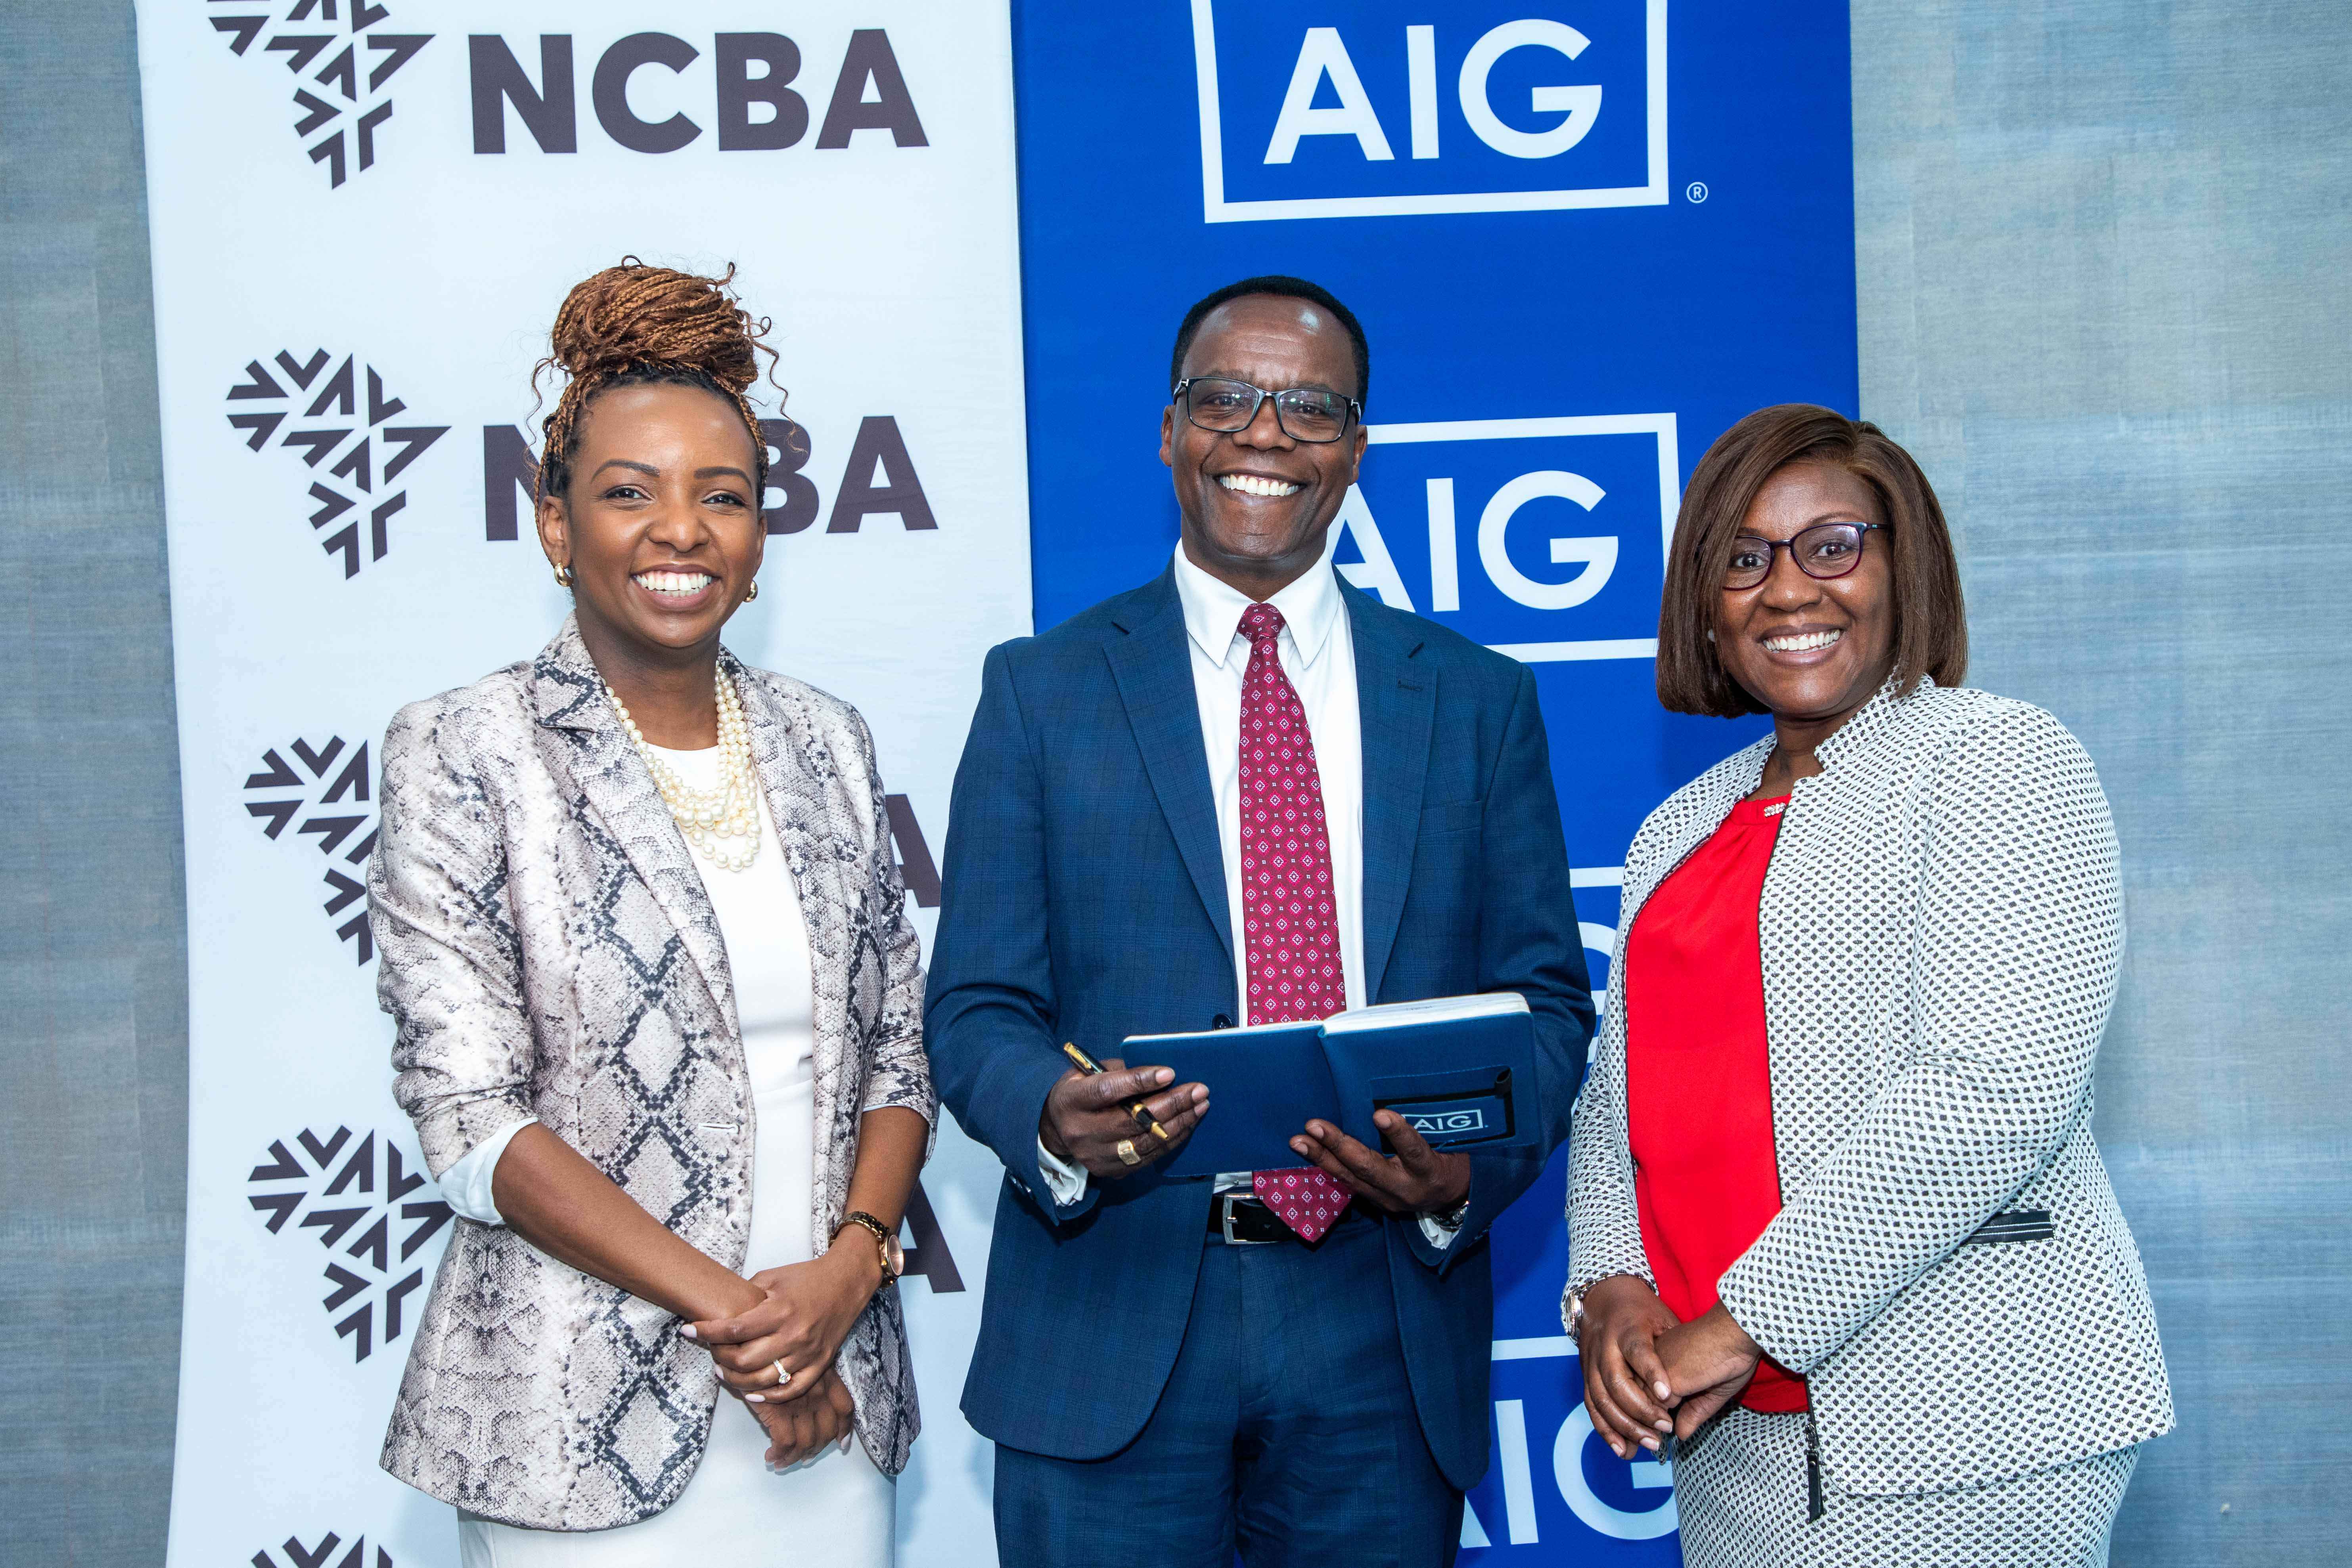 (From Left to Right) Louisa Wandabwa, NCBA Group Chief of Staff and Director of Strategy, John Gachora, NCBA Group MD, and Stella Njunge, MD, AIG Kenya.